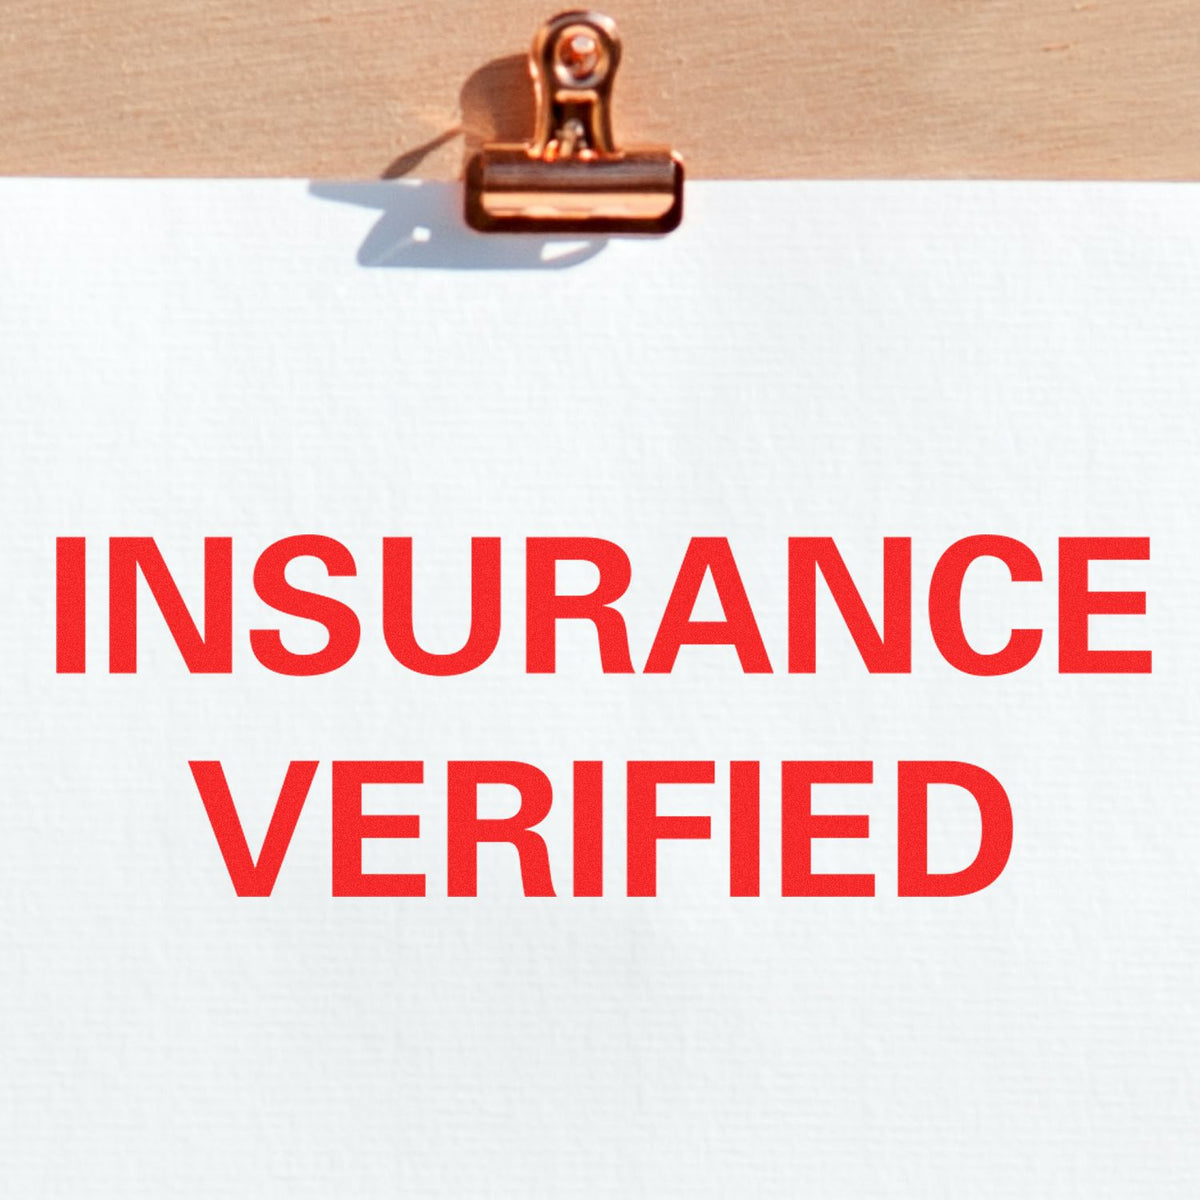 Self-Inking Insurance Verified Stamp In Use Photo